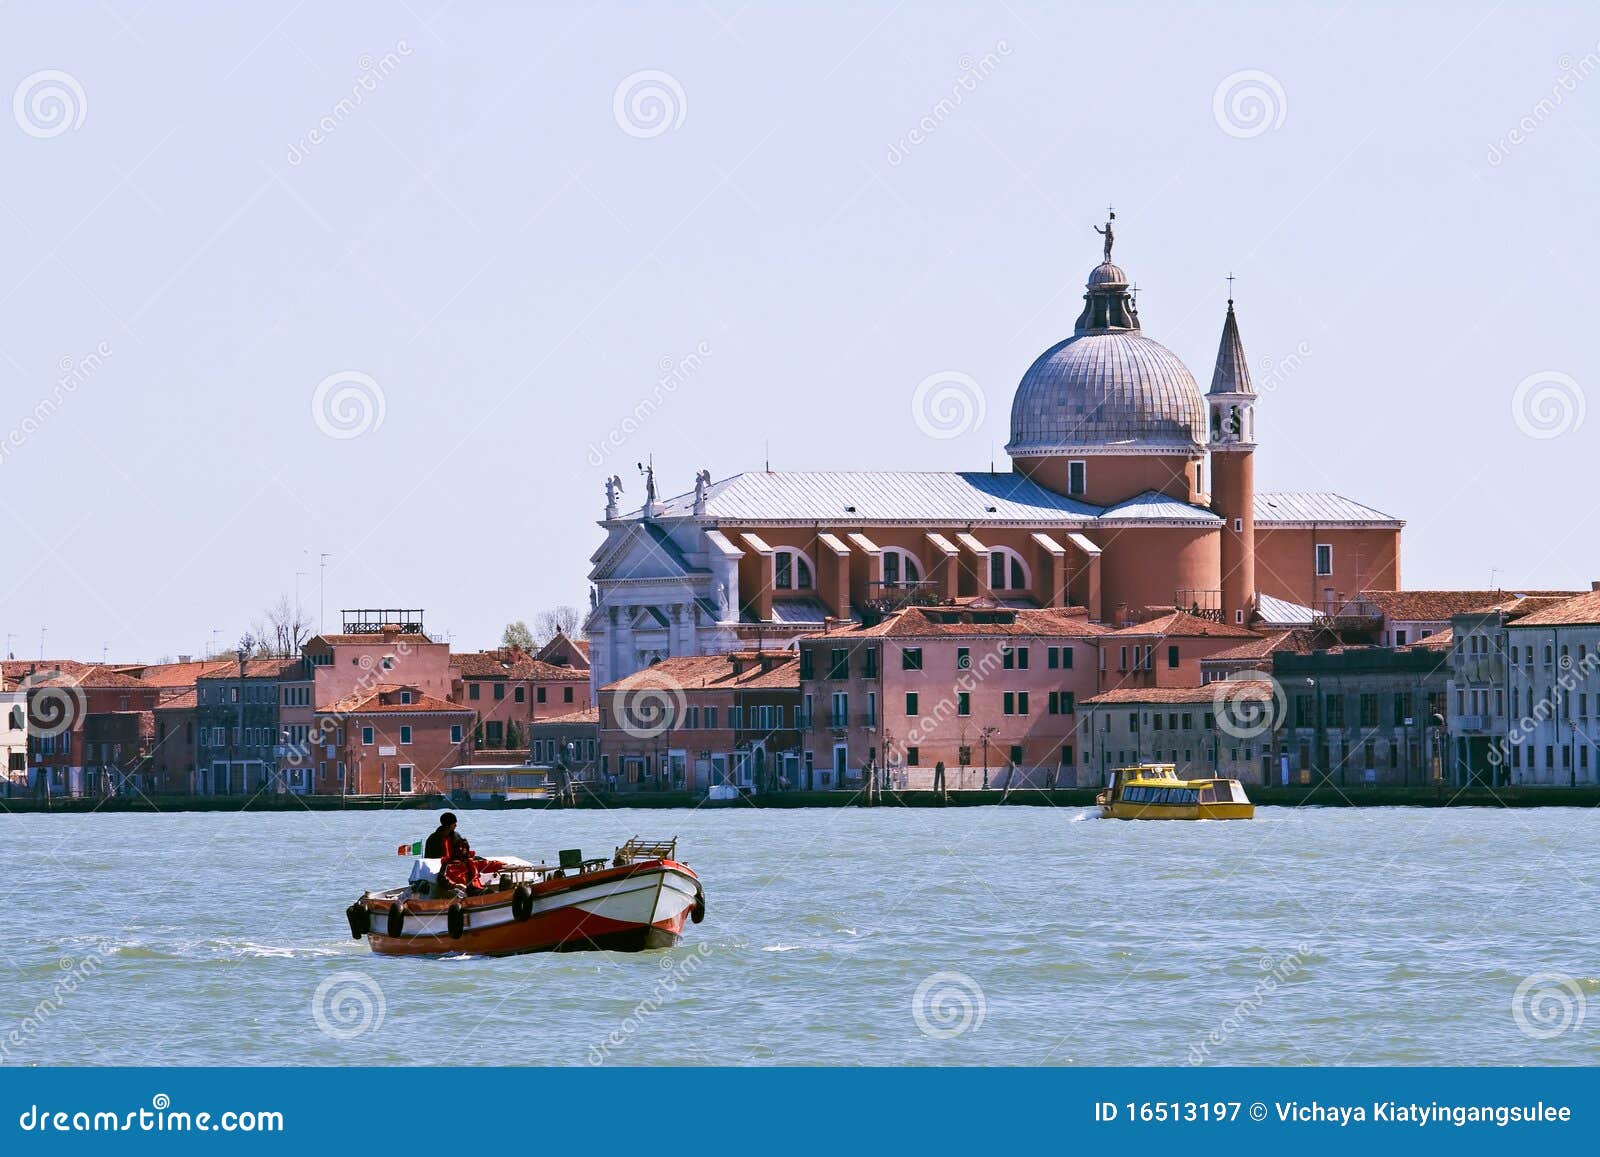 Church at Grand canal in Venice, Italy